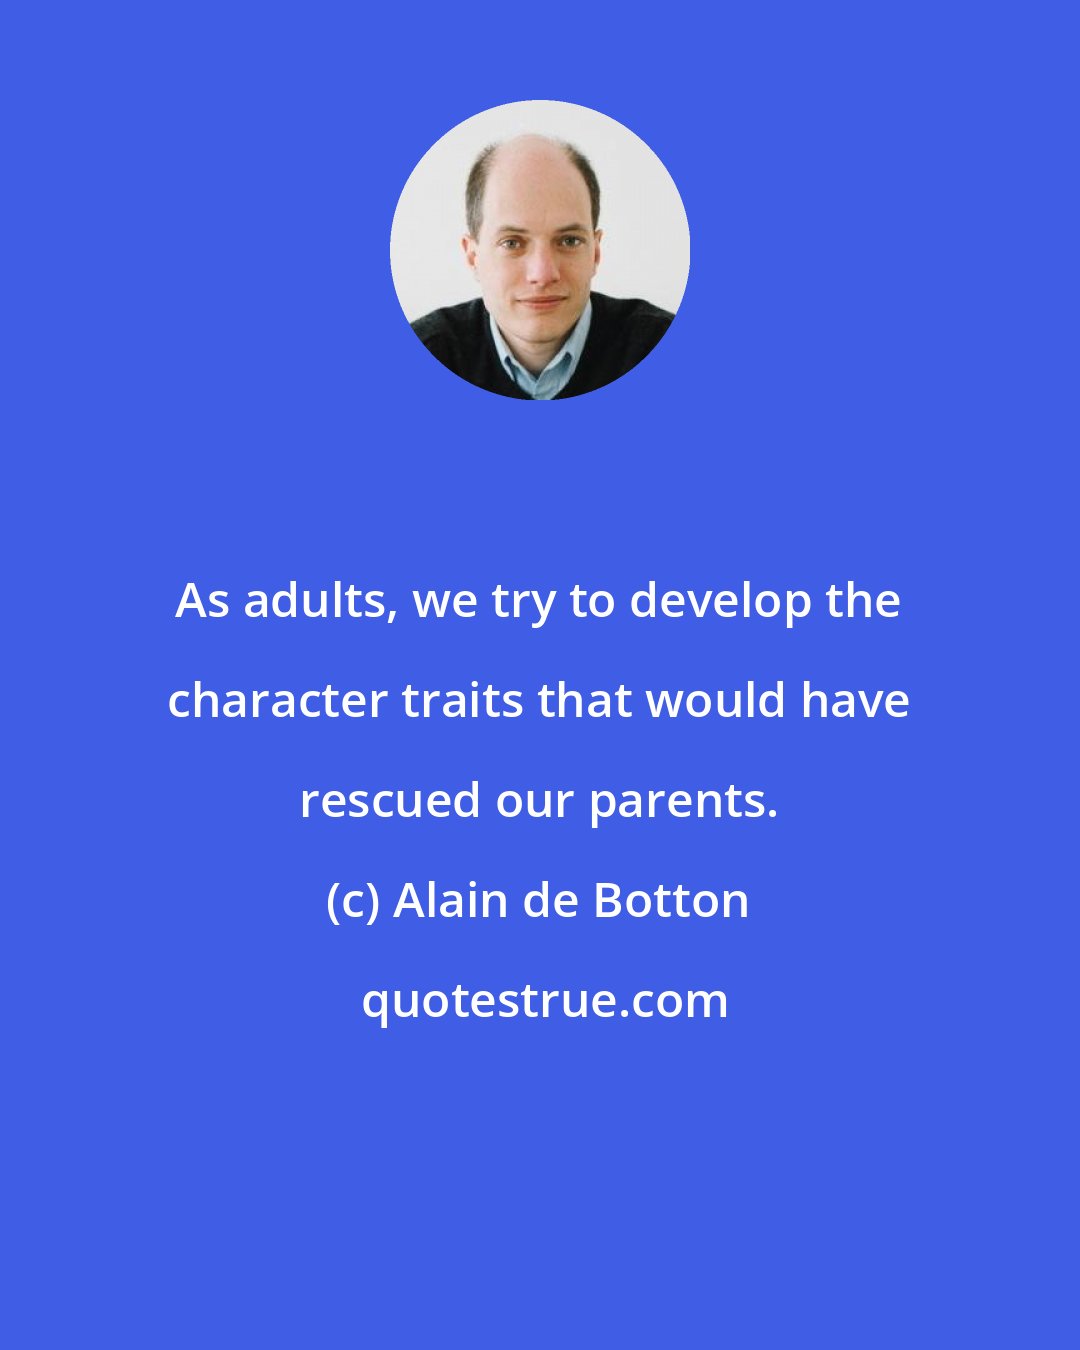 Alain de Botton: As adults, we try to develop the character traits that would have rescued our parents.